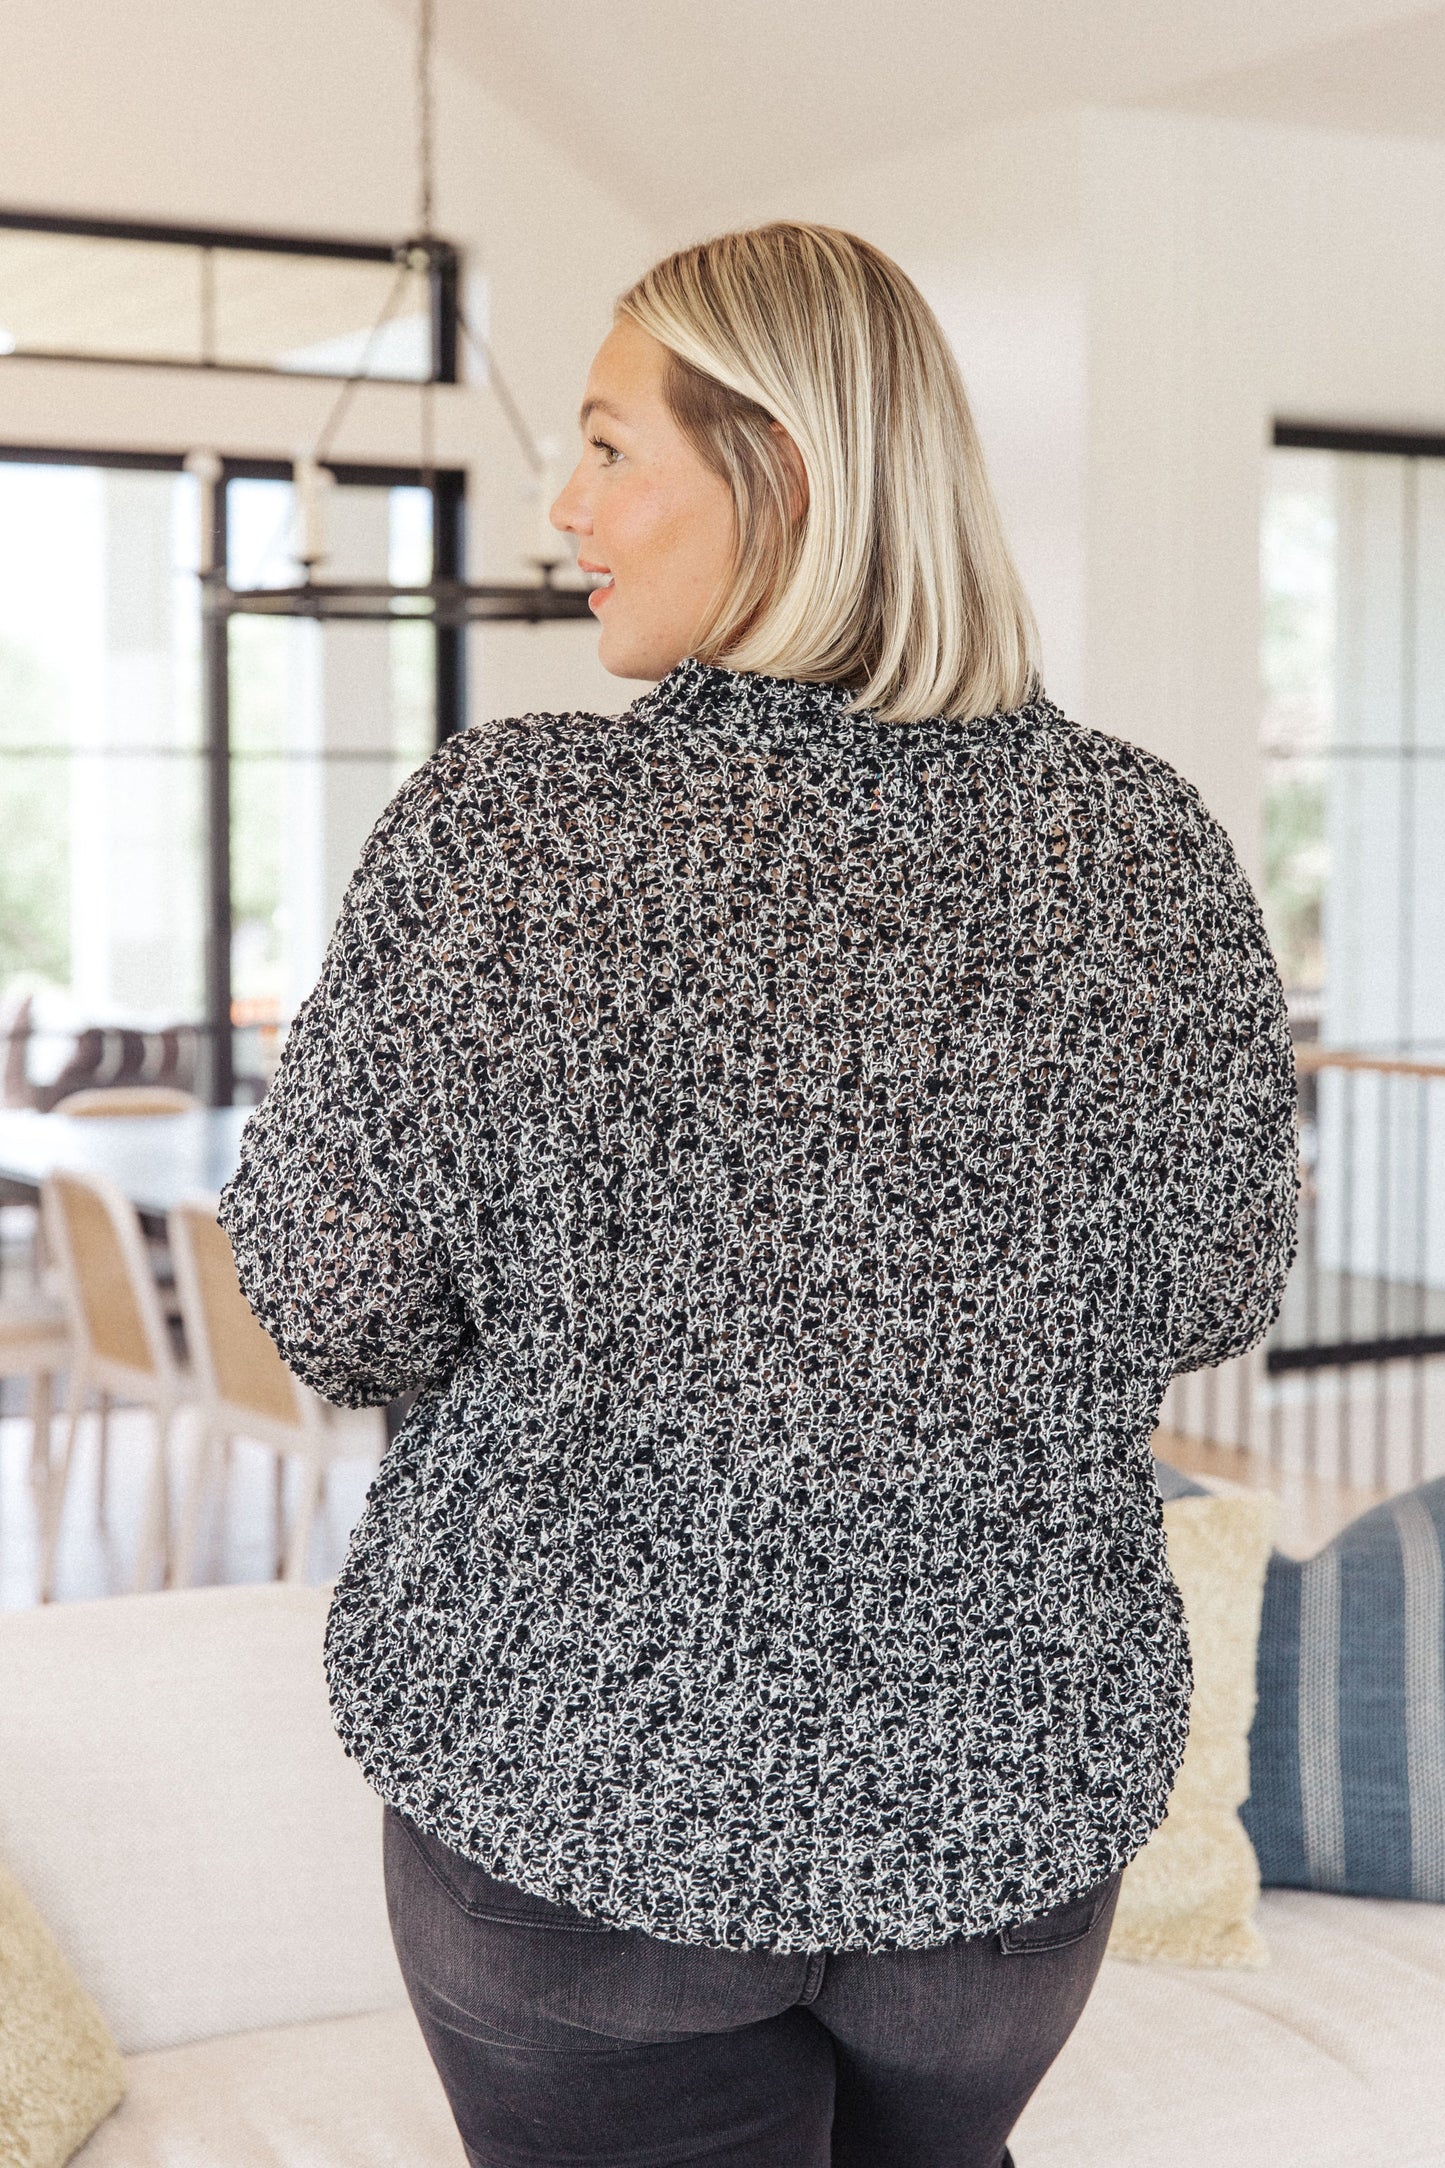 Low and Slow Sweater - Southern Divas Boutique